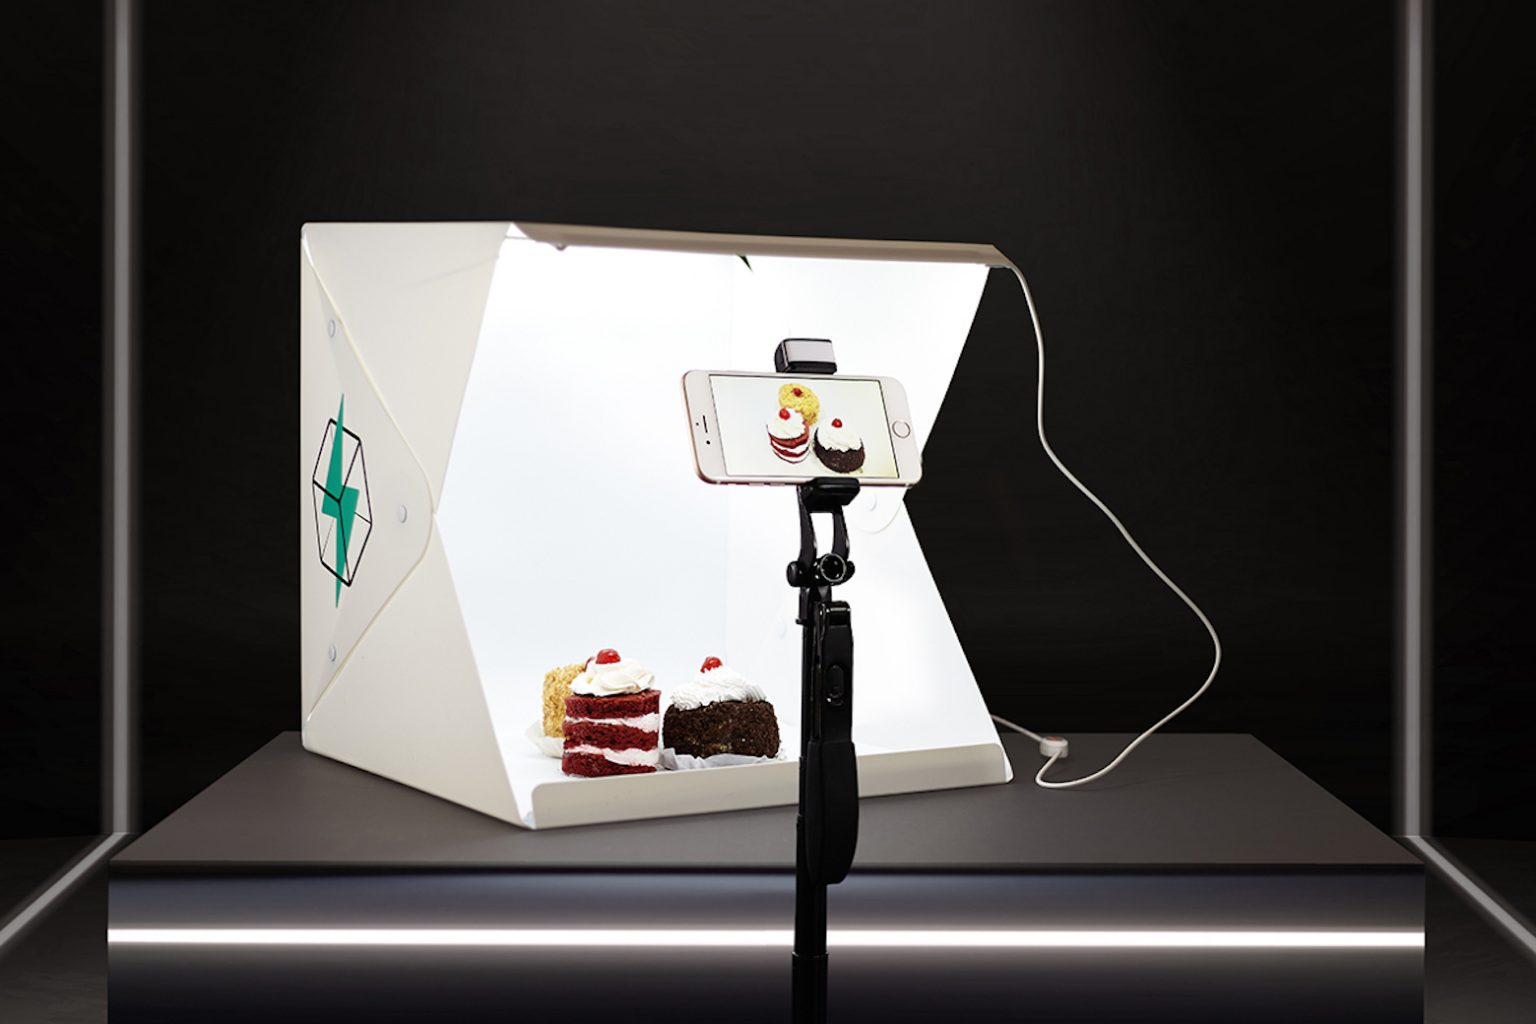 This portable photo studio is perfect for product marketing